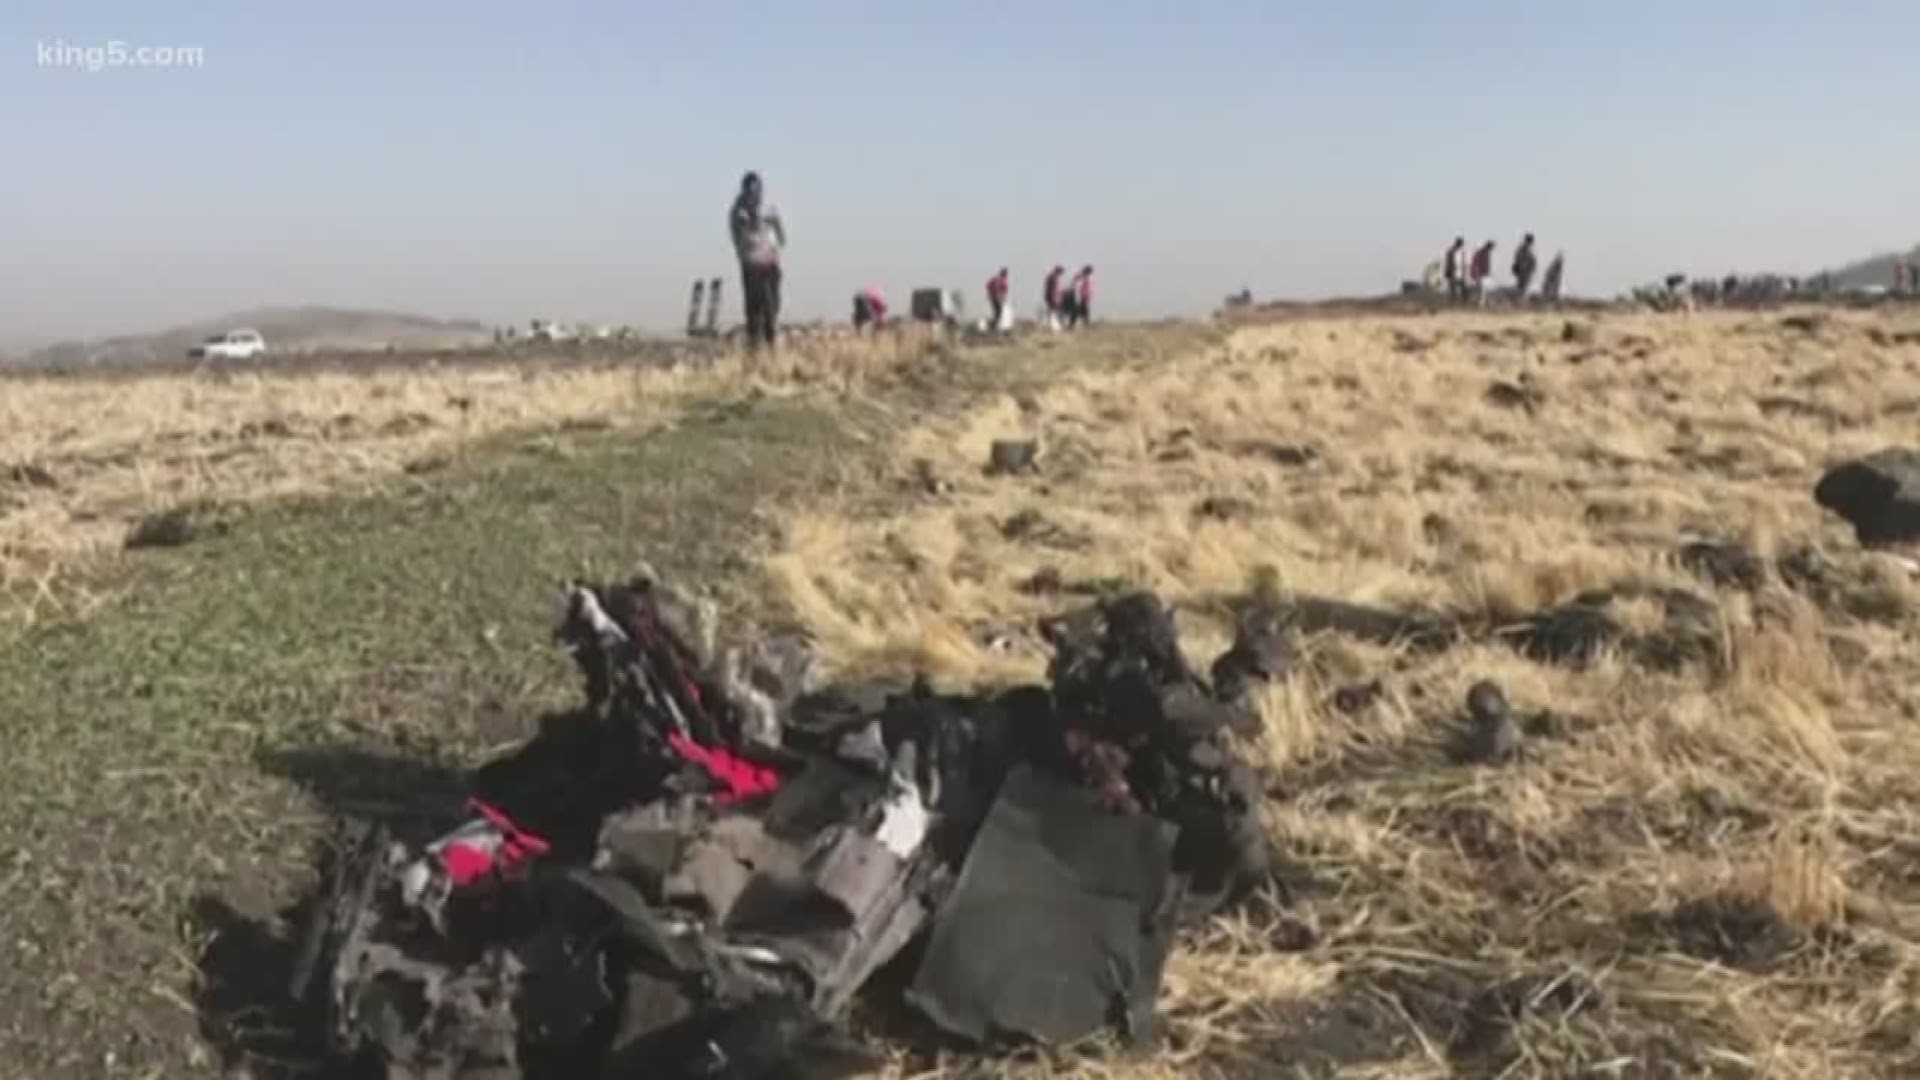 The report claims that the jet's MCAS system caused its nose to dip four times during the deadly Ethiopian Airlines crash.